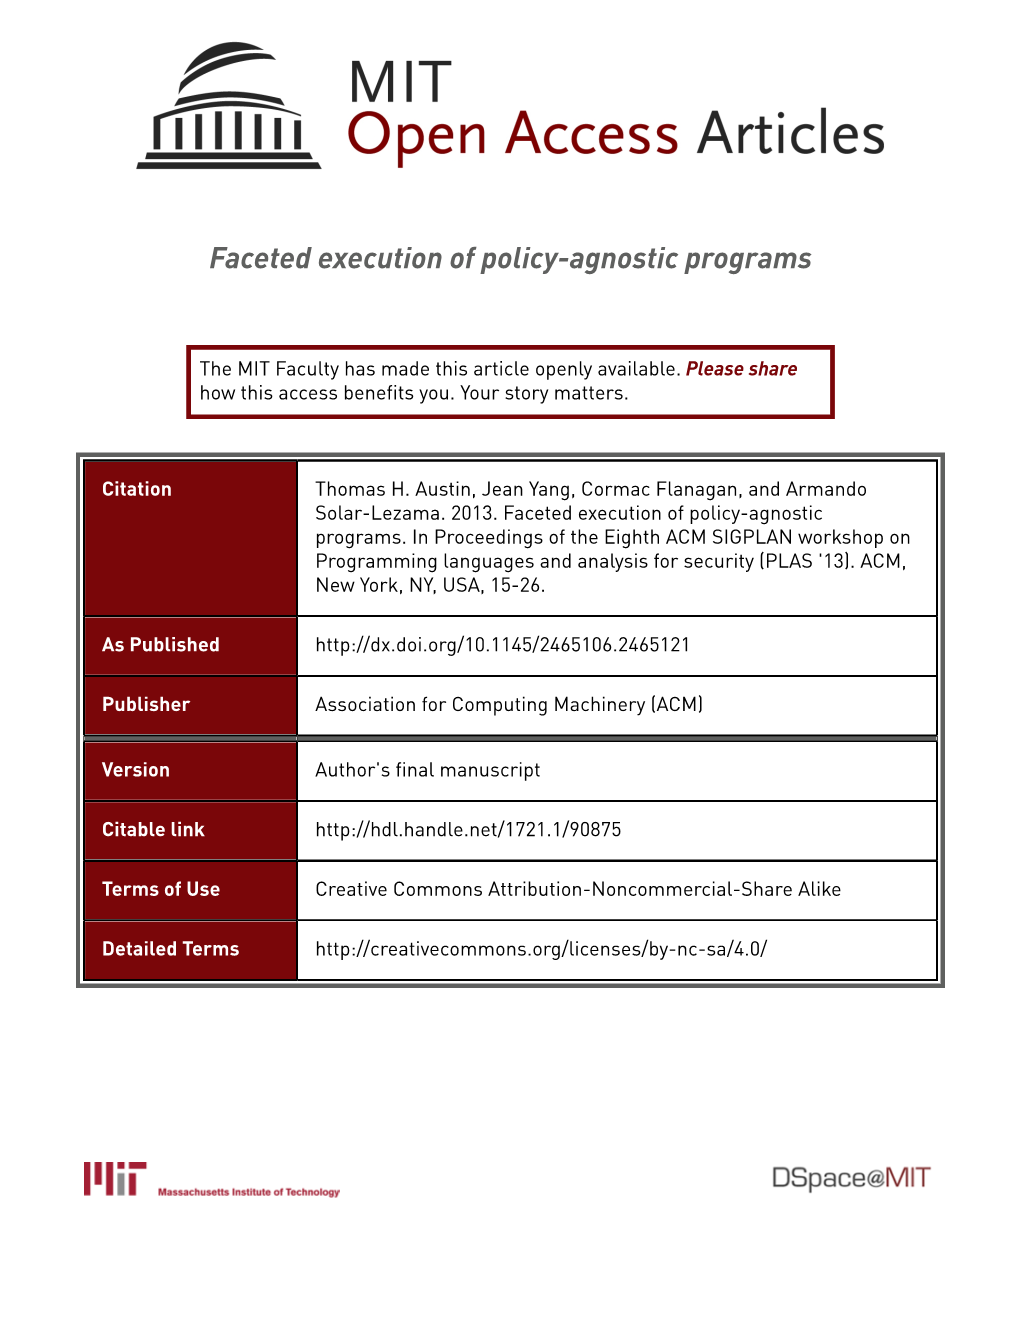 Faceted Execution of Policy-Agnostic Programs